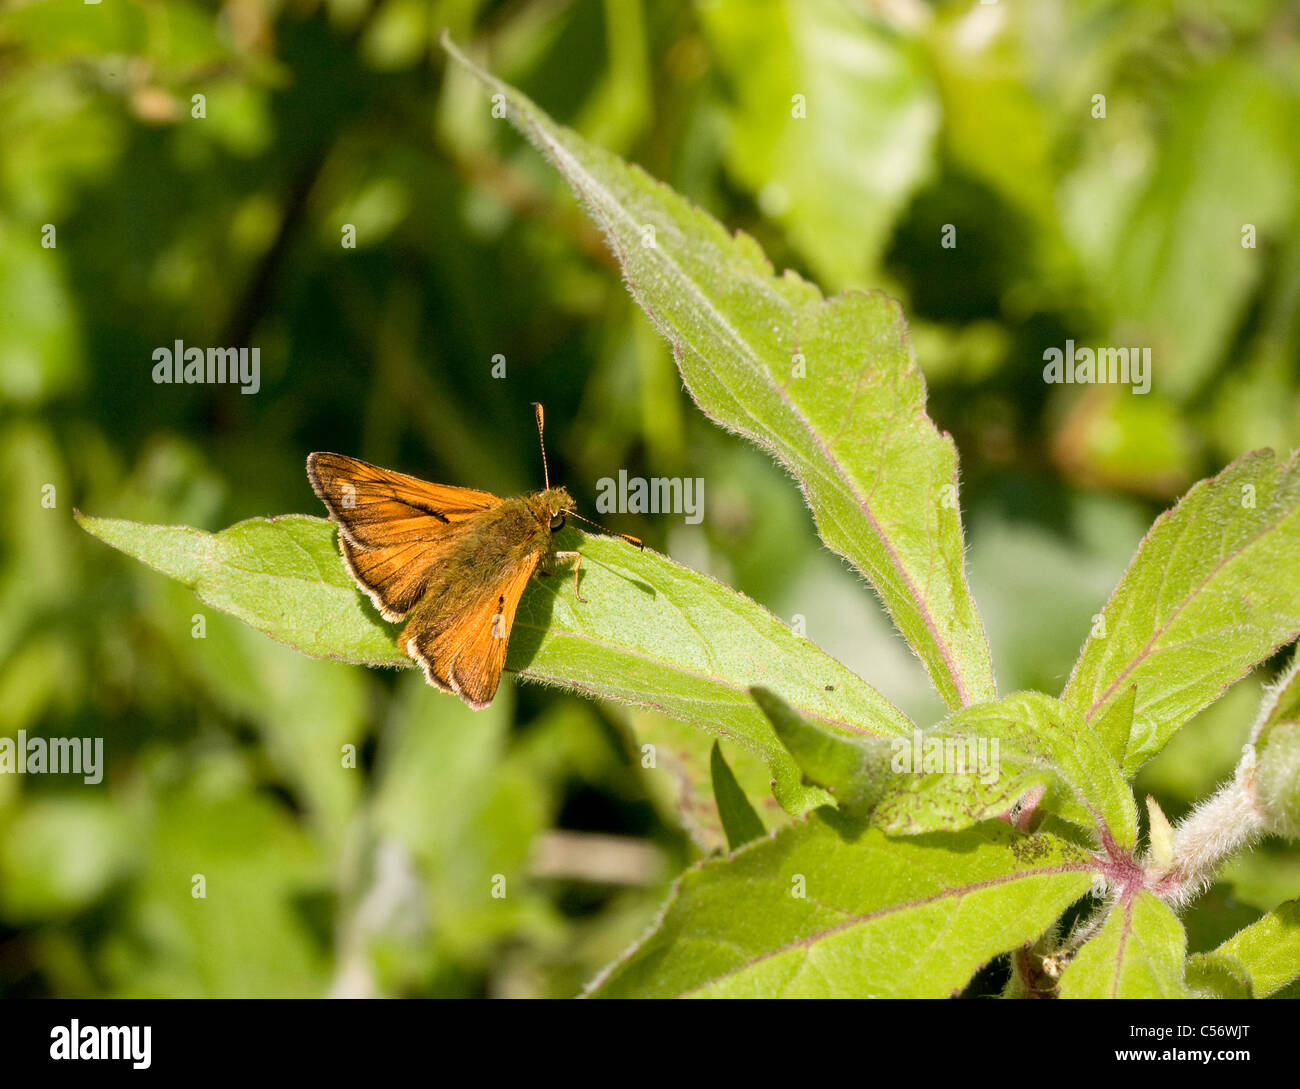 Male Large Skipper butterfly Ochlodes sylvanus on a leaf of Great Willow Herb Stock Photo